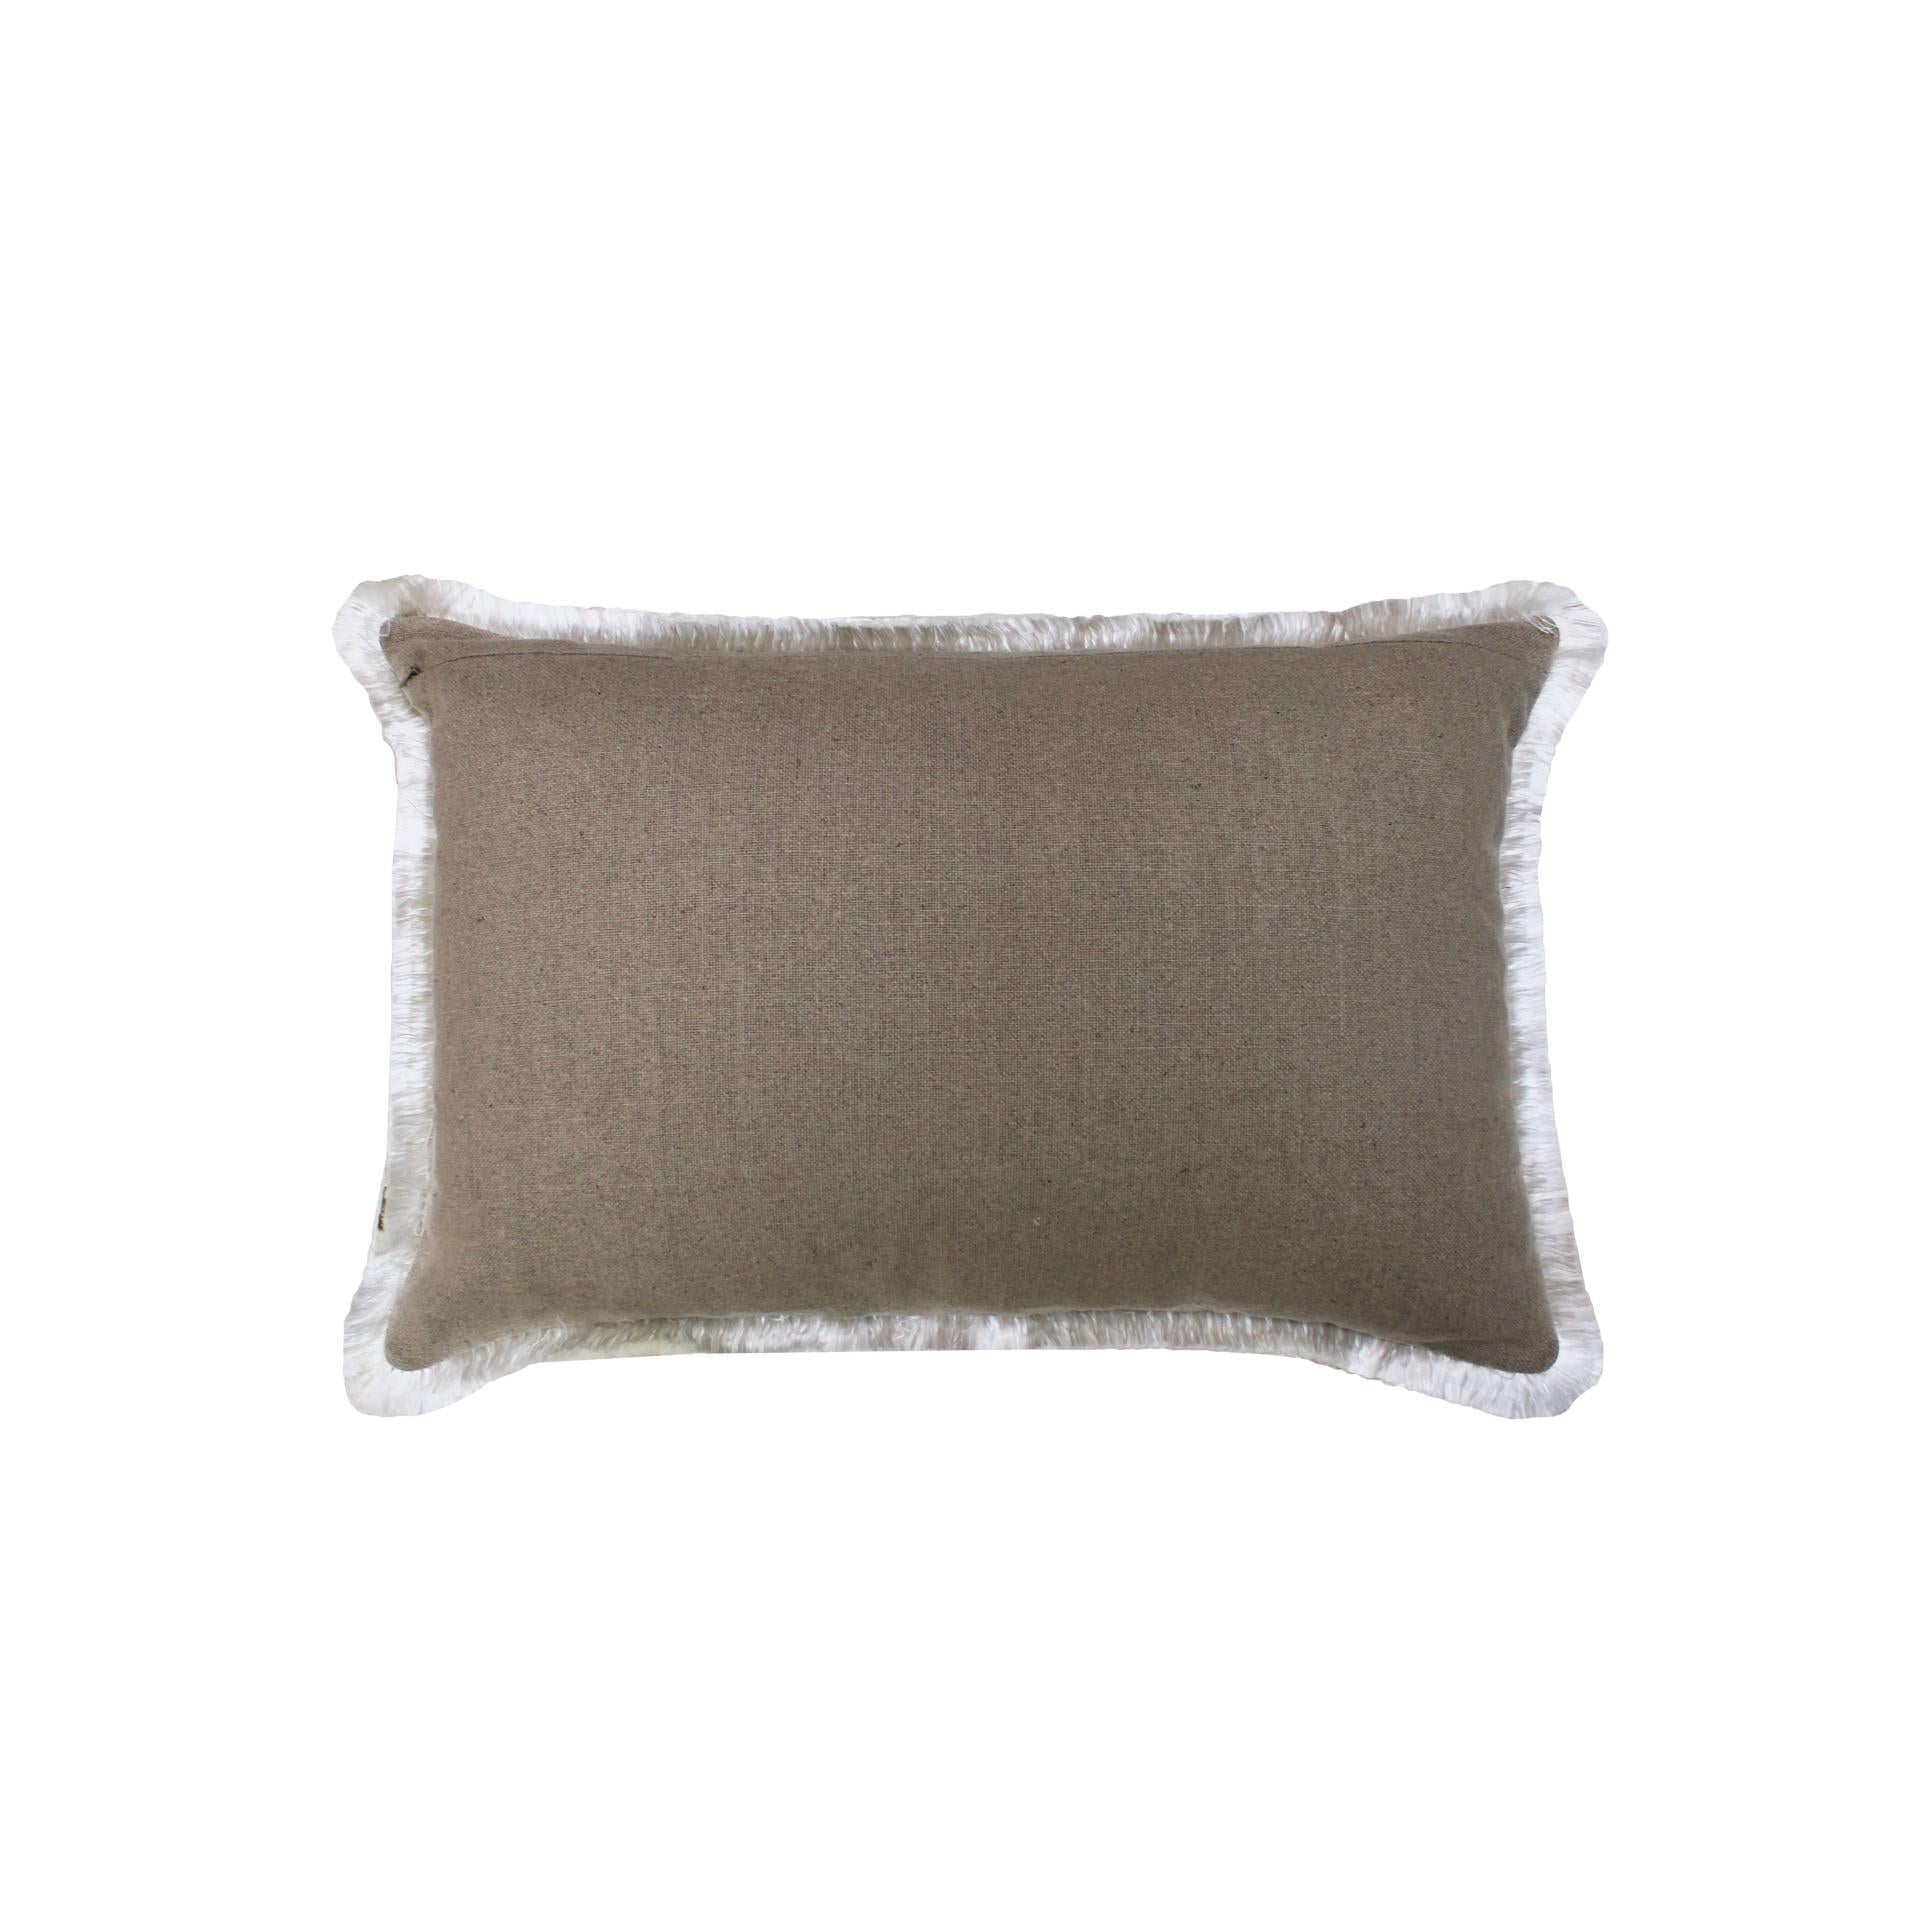 Cream velvet cushion in high-quality cotton with double tinsel and linen back.

Every item LA Studio offers is checked by our team of 10 craftsmen in our in-house workshop. Special restoration or reupholstery requests can be done. Lighting can be